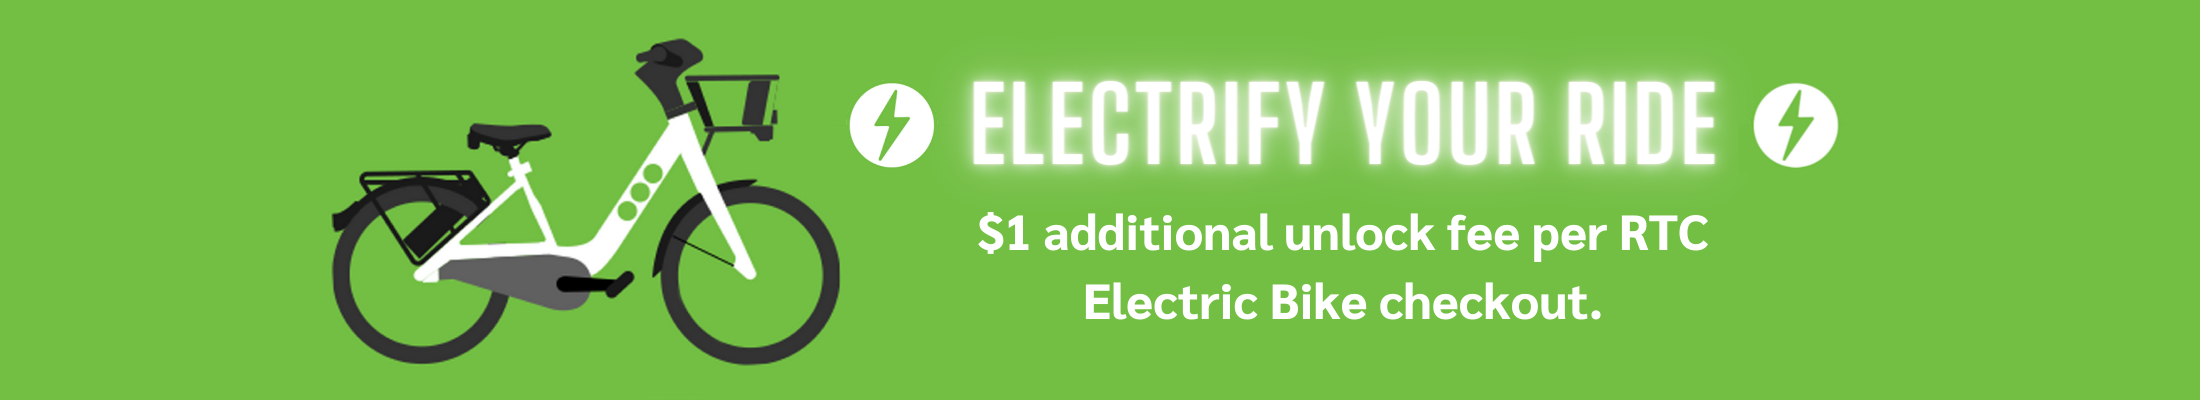 Electrify Your Ride Banner